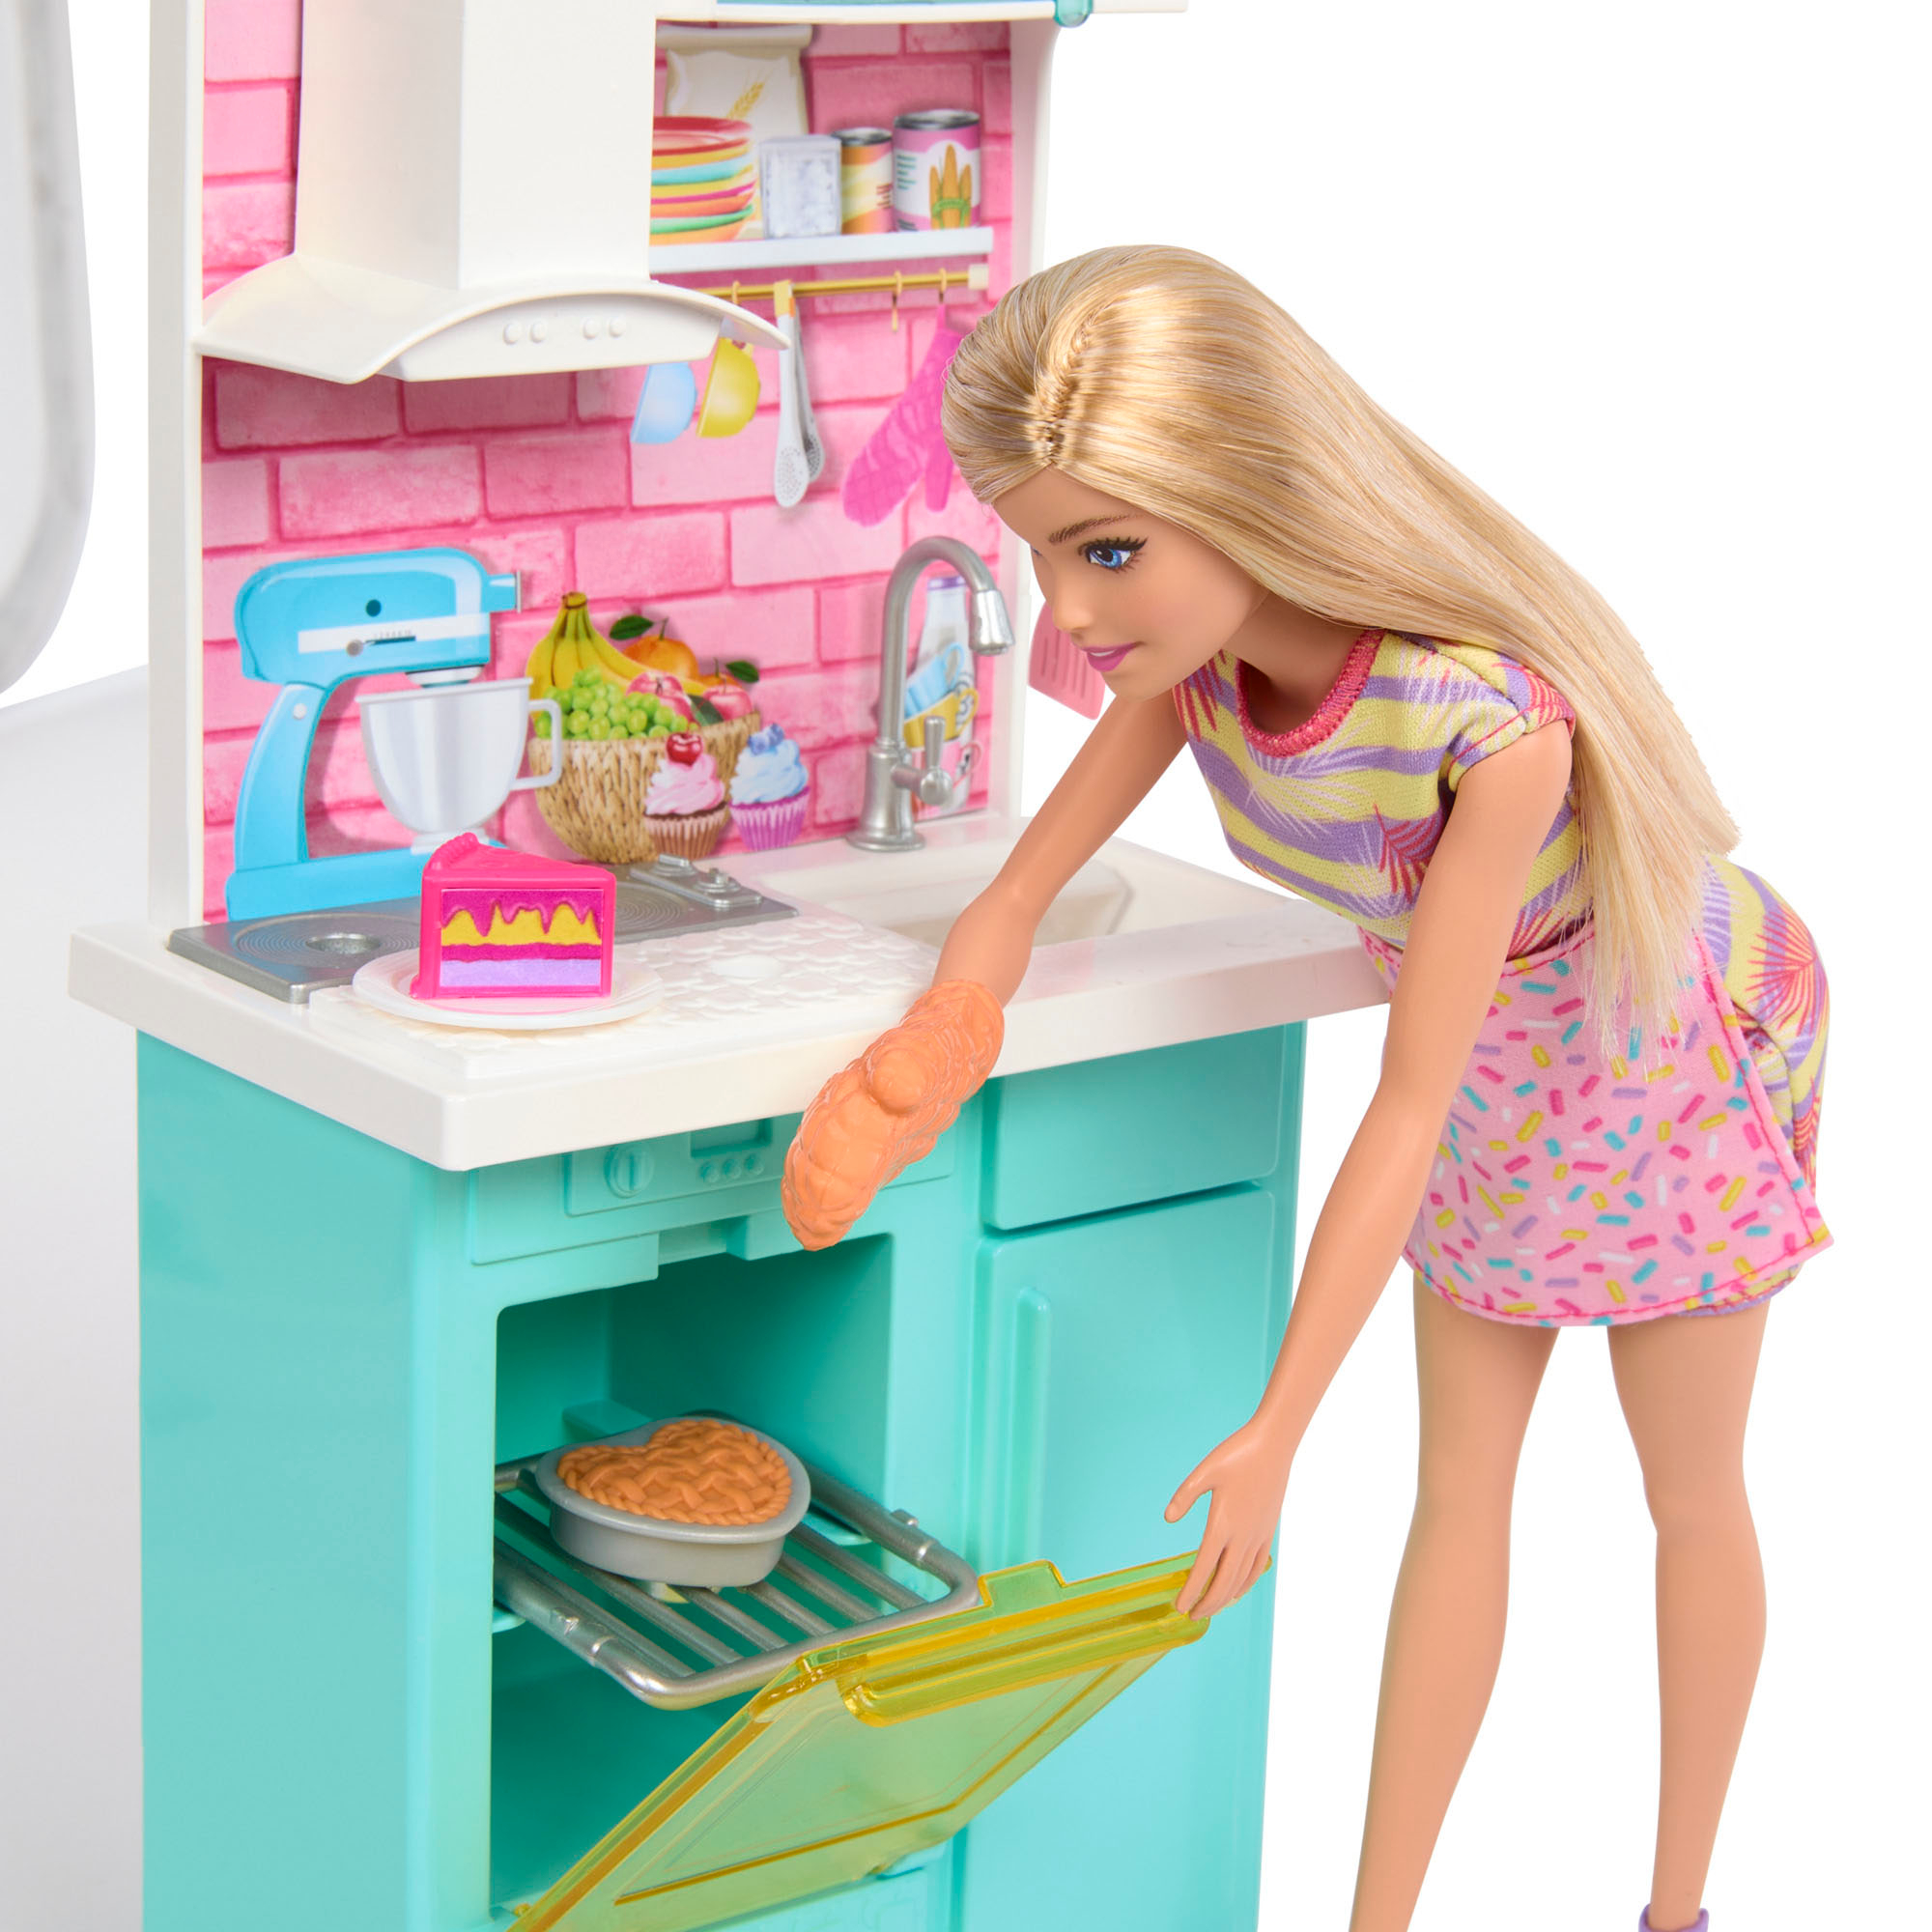 Barbie® Bakery Doll and Accessories Playset